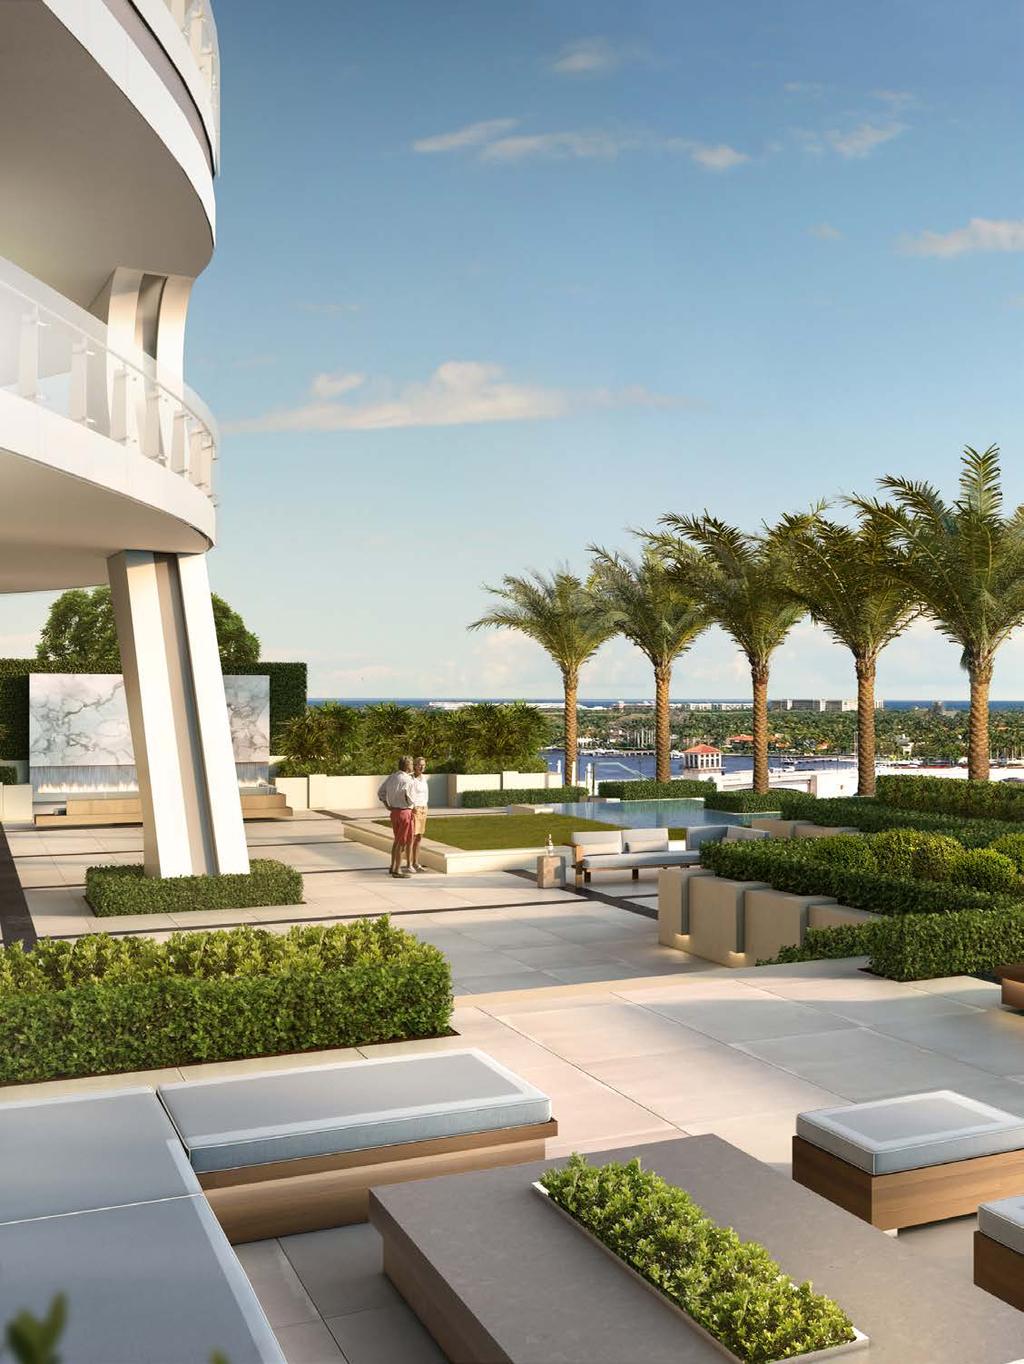 WEST PALM BEACH Sun, Surf and Sophistication Lavish residential towers are changing The Palm Beaches skyline in a dramatic fashion, a trend that is fueled by the area s unprecedented growth as a